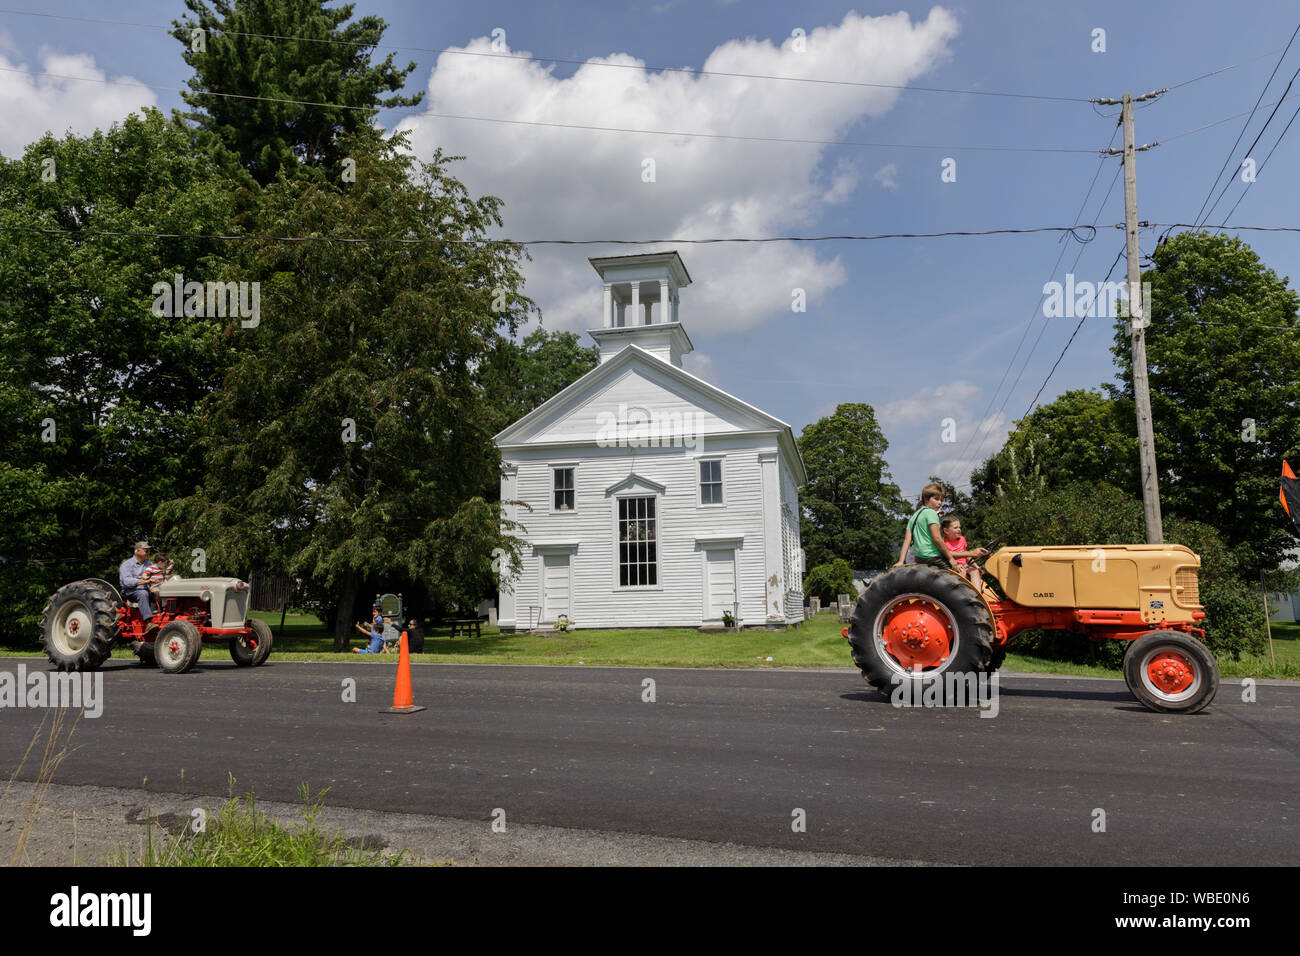 ANTIQUE TRACTOR PARADE, ROSEBOOM, OTSEGO COUNTY, NEW YORK STATE, USA. Stock Photo